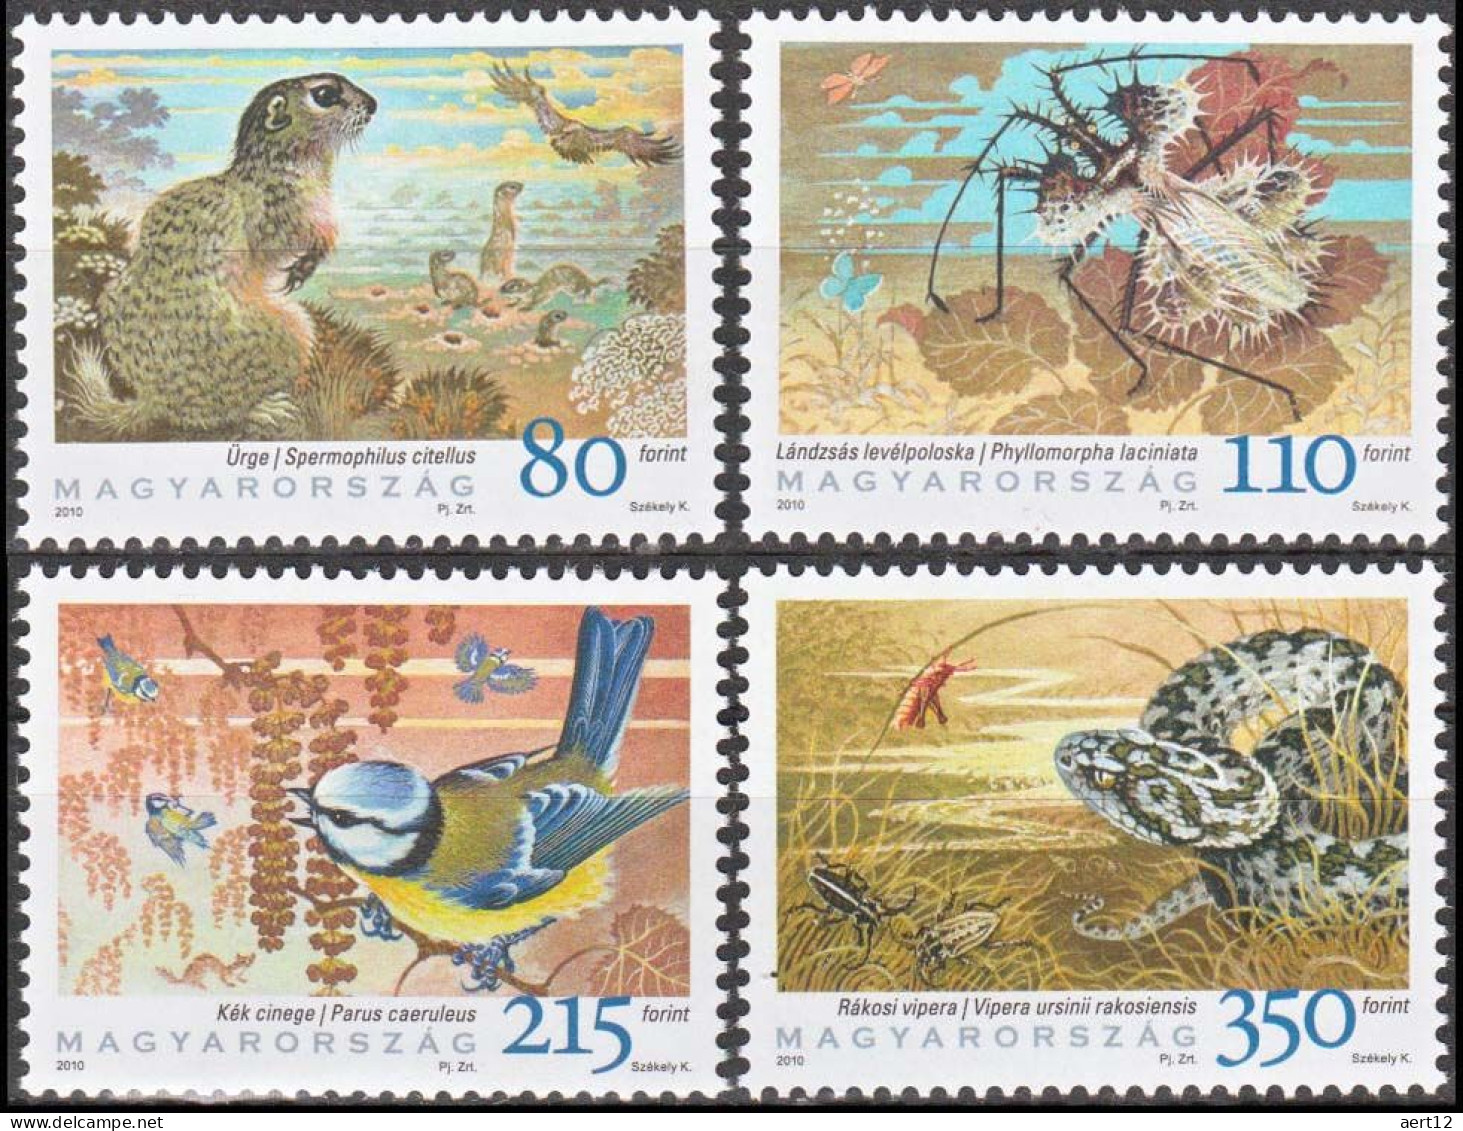 2010, Hungary, Biodiversity, Birds, Insects, Rodents, Snakes, Squirrels, 4 Stamps, MNH(**), HU 5473-76 - Serpientes